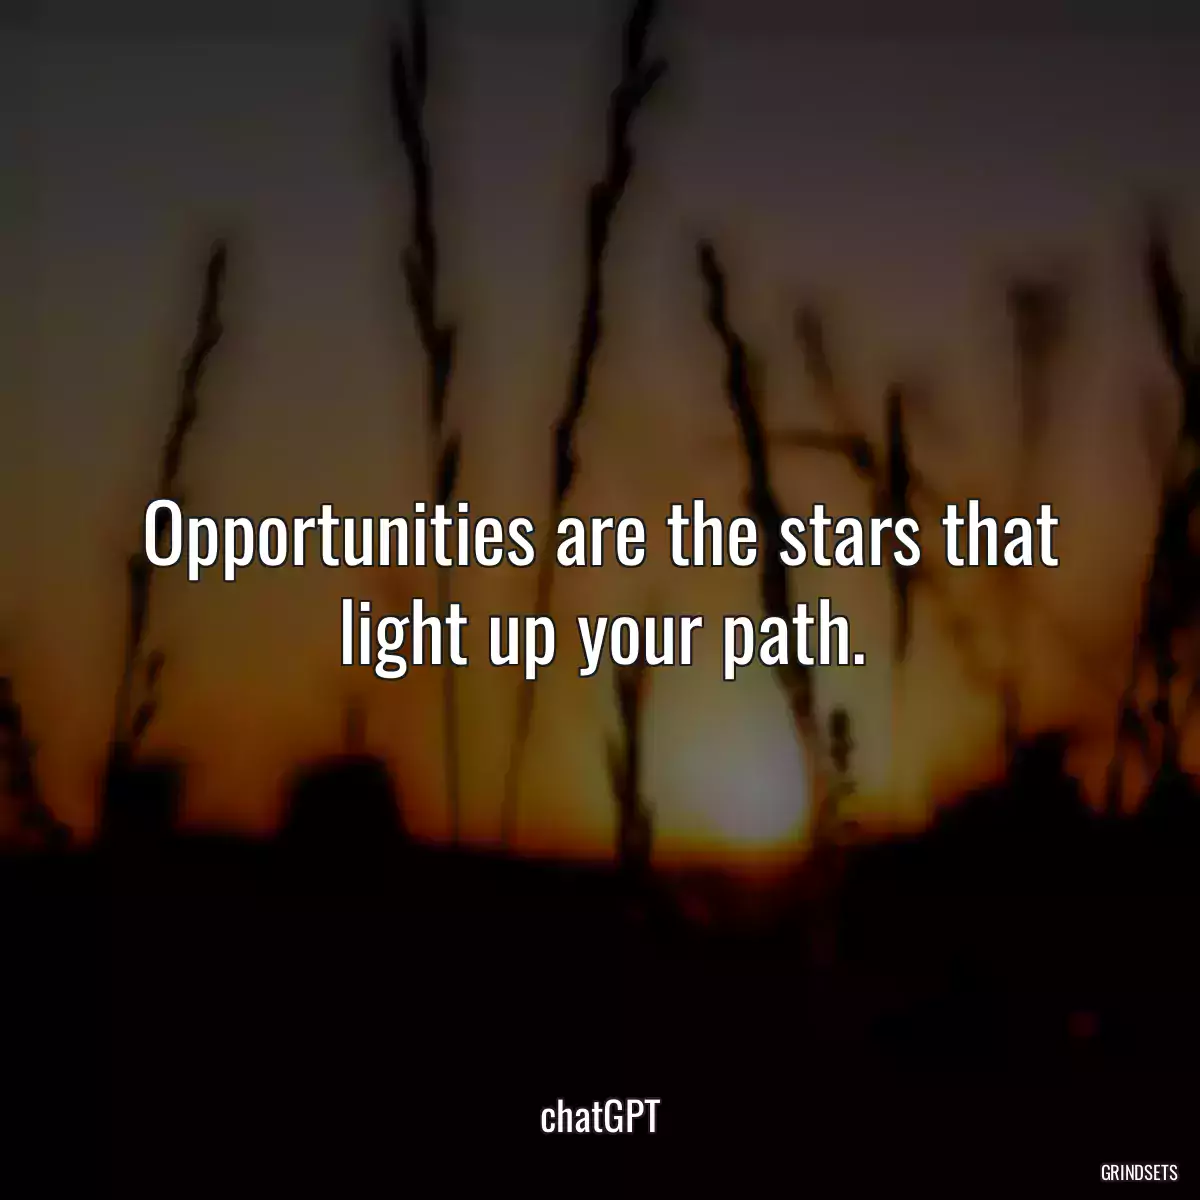 Opportunities are the stars that light up your path.